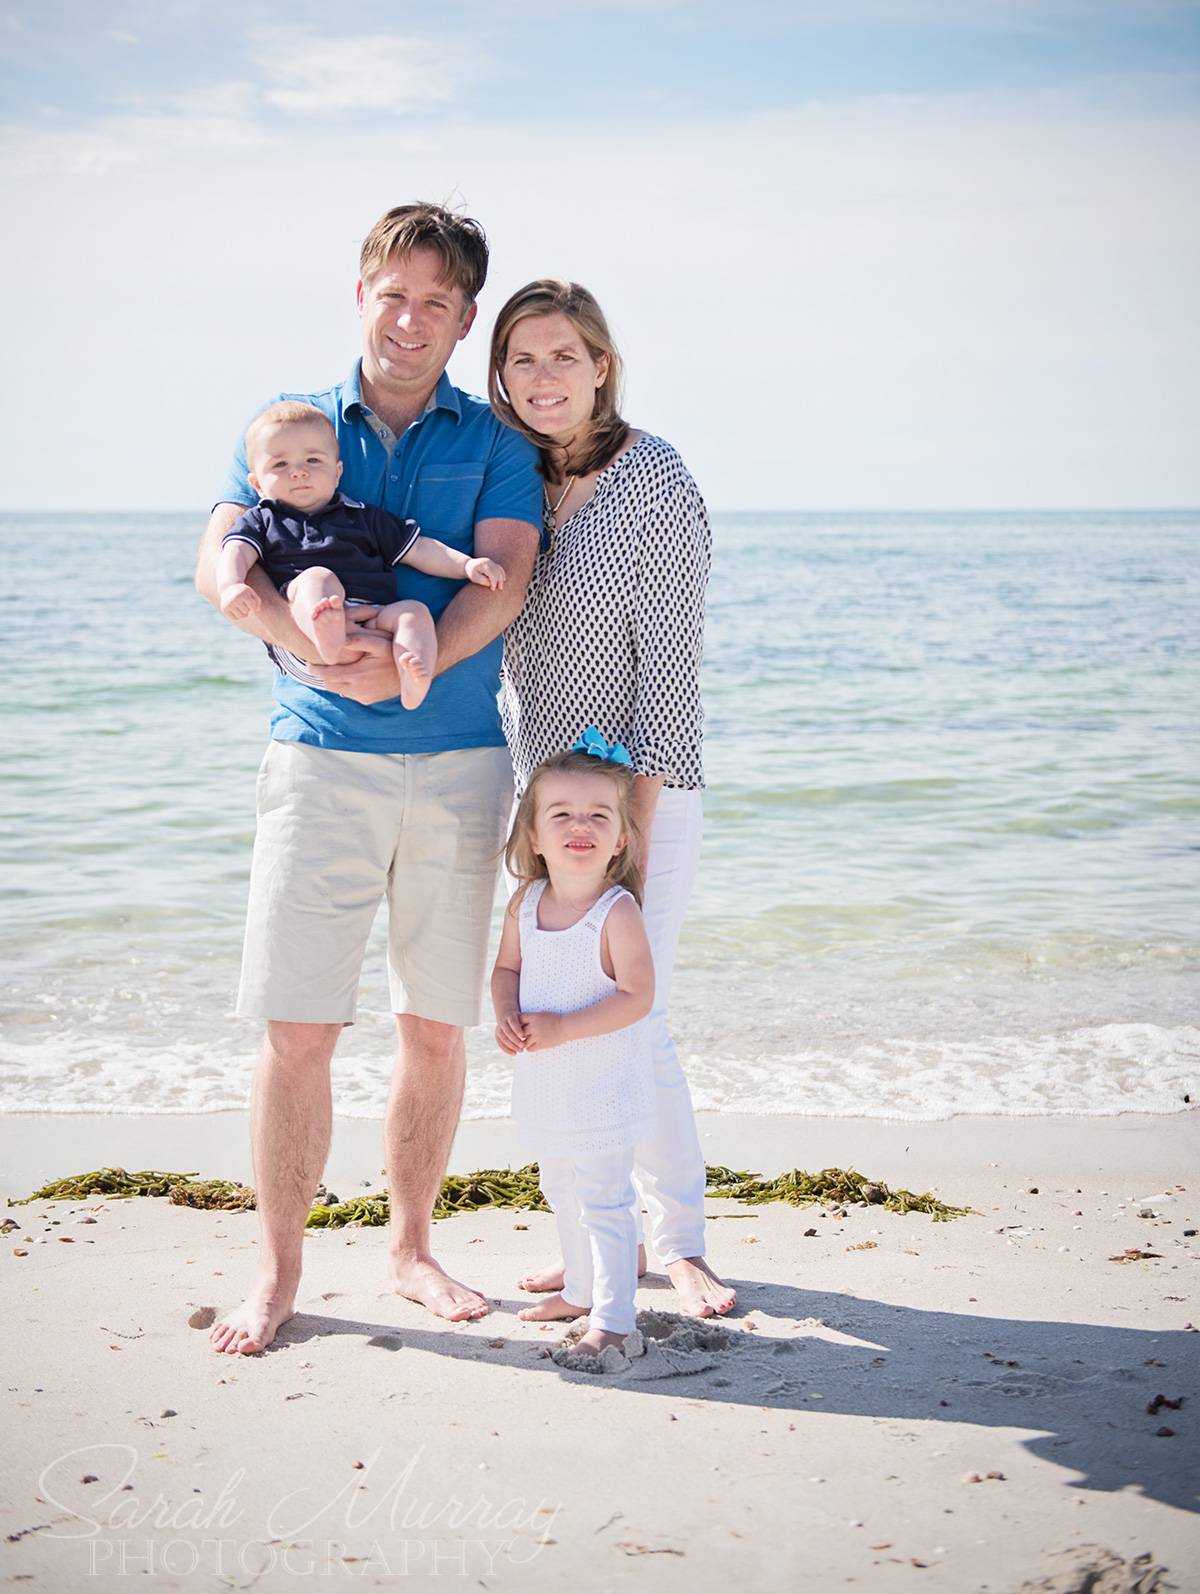 Private Home Family Photography Session on the Beach in Hyannisport, Massachusetts - Sarah Murray Photography